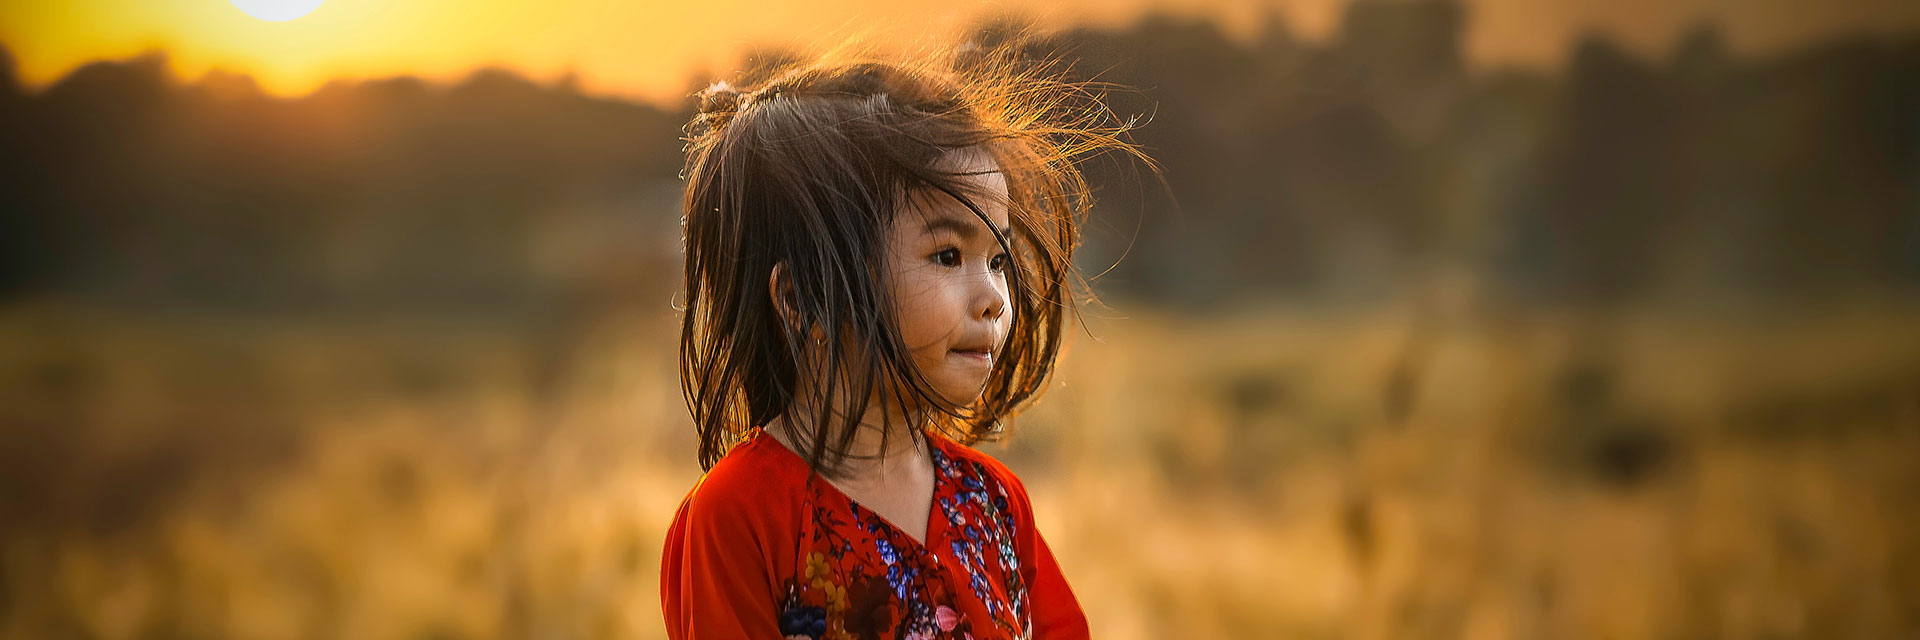 A little girl on a field during golden hour.